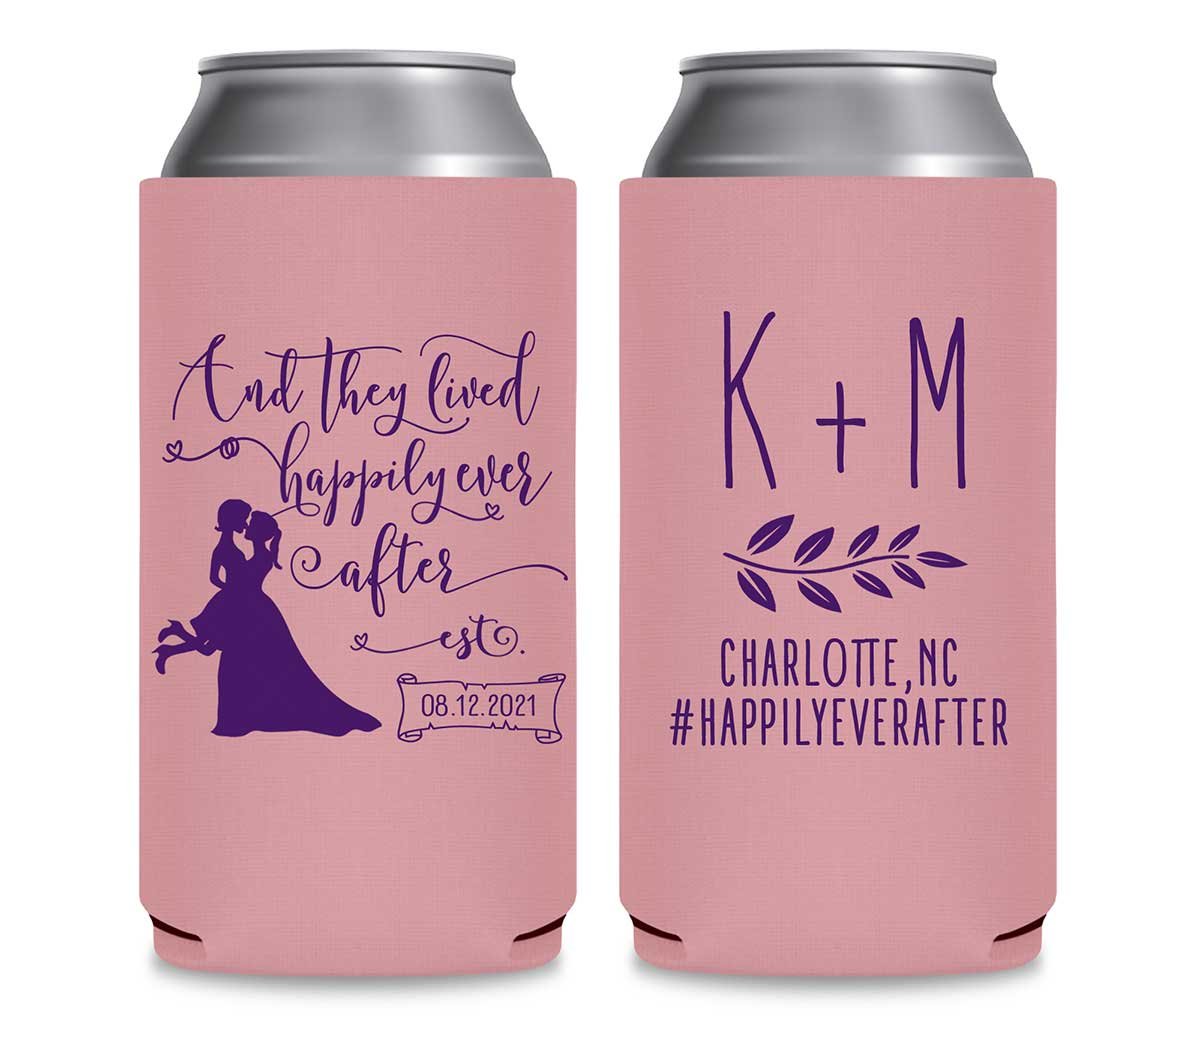 And They Lived Happily Ever After 2B Foldable 12 oz Slim Can Koozies Wedding Gifts for Guests